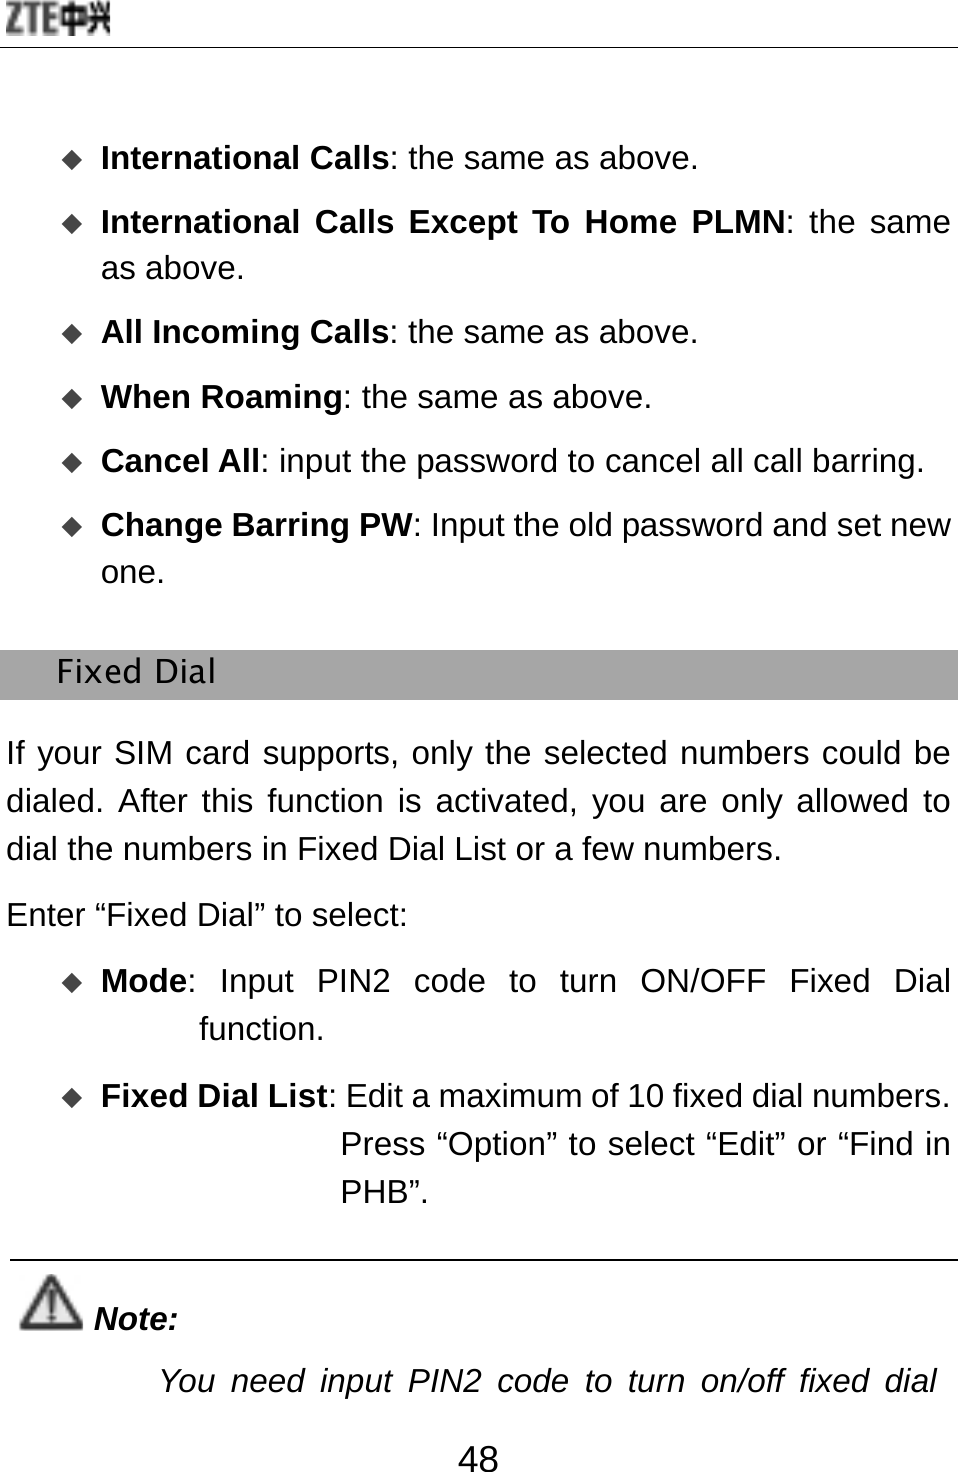  48  International Calls: the same as above.  International Calls Except To Home PLMN: the same as above.   All Incoming Calls: the same as above.  When Roaming: the same as above.  Cancel All: input the password to cancel all call barring.  Change Barring PW: Input the old password and set new one. Fixed Dial If your SIM card supports, only the selected numbers could be dialed. After this function is activated, you are only allowed to dial the numbers in Fixed Dial List or a few numbers. Enter “Fixed Dial” to select:  Mode: Input PIN2 code to turn ON/OFF Fixed Dial function.   Fixed Dial List: Edit a maximum of 10 fixed dial numbers. Press “Option” to select “Edit” or “Find in PHB”.   Note: You need input PIN2 code to turn on/off fixed dial 